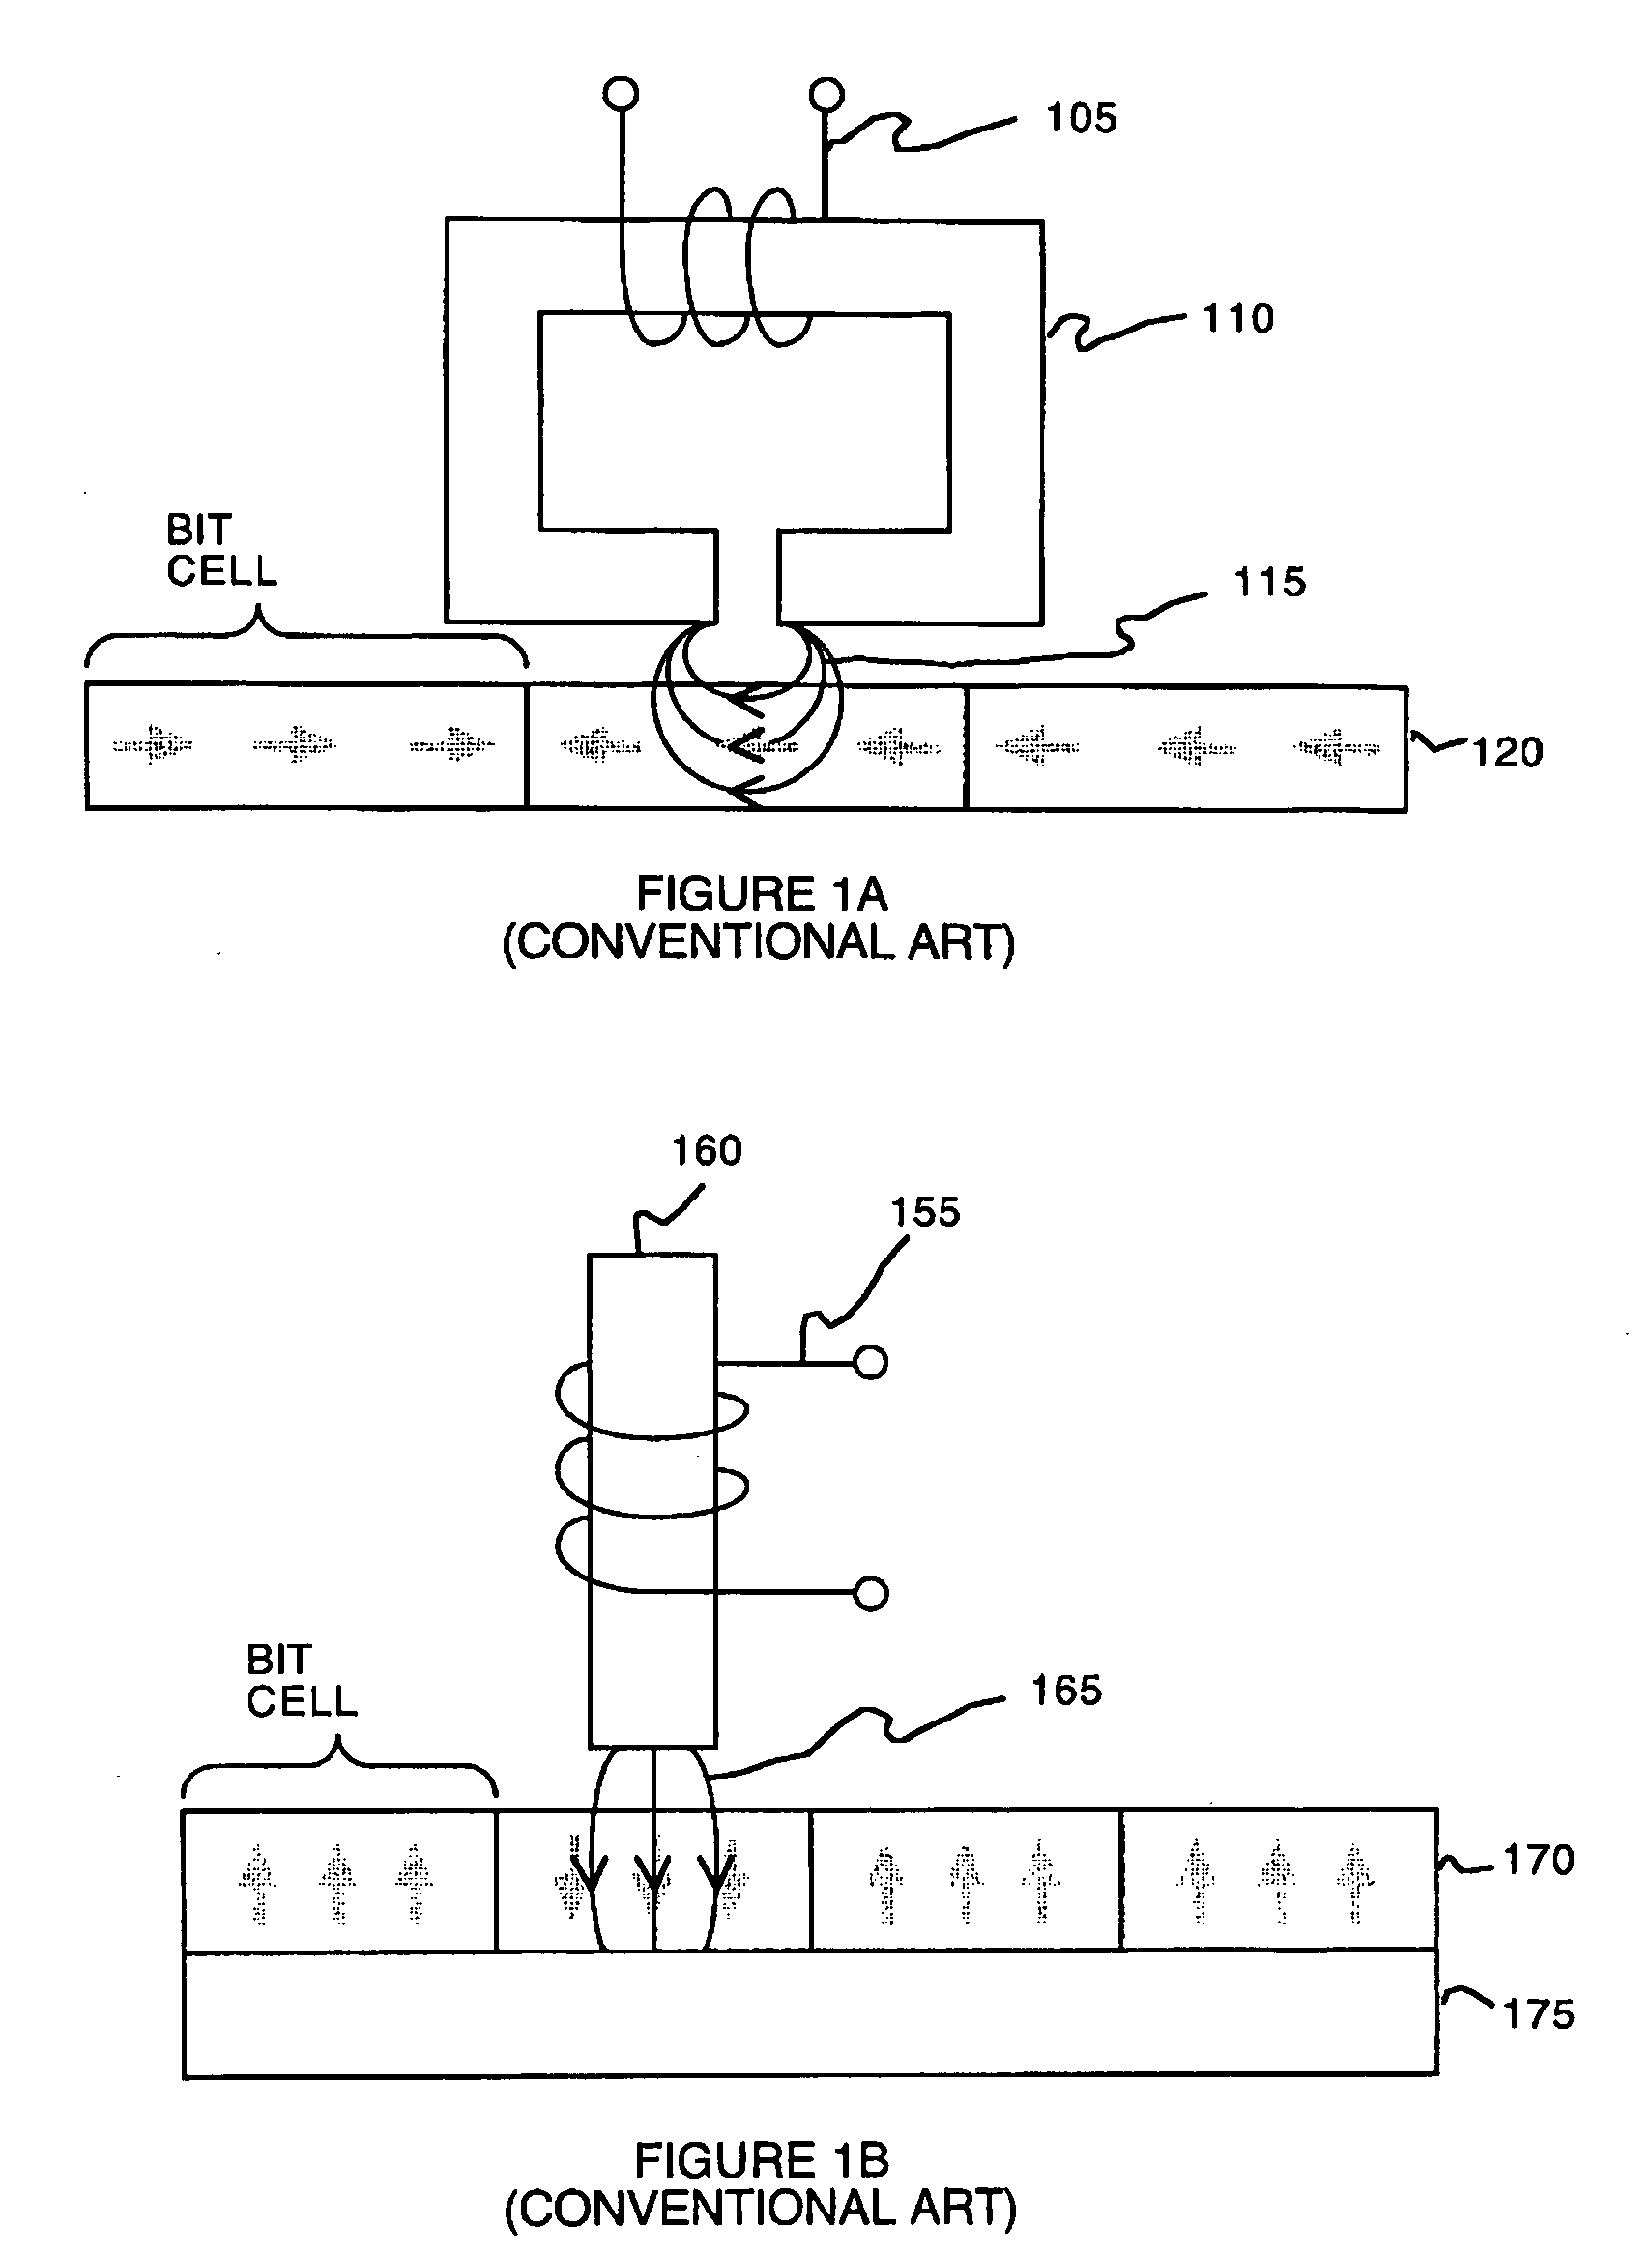 Self aligned wrap around shield for perpendicular magnetic recording